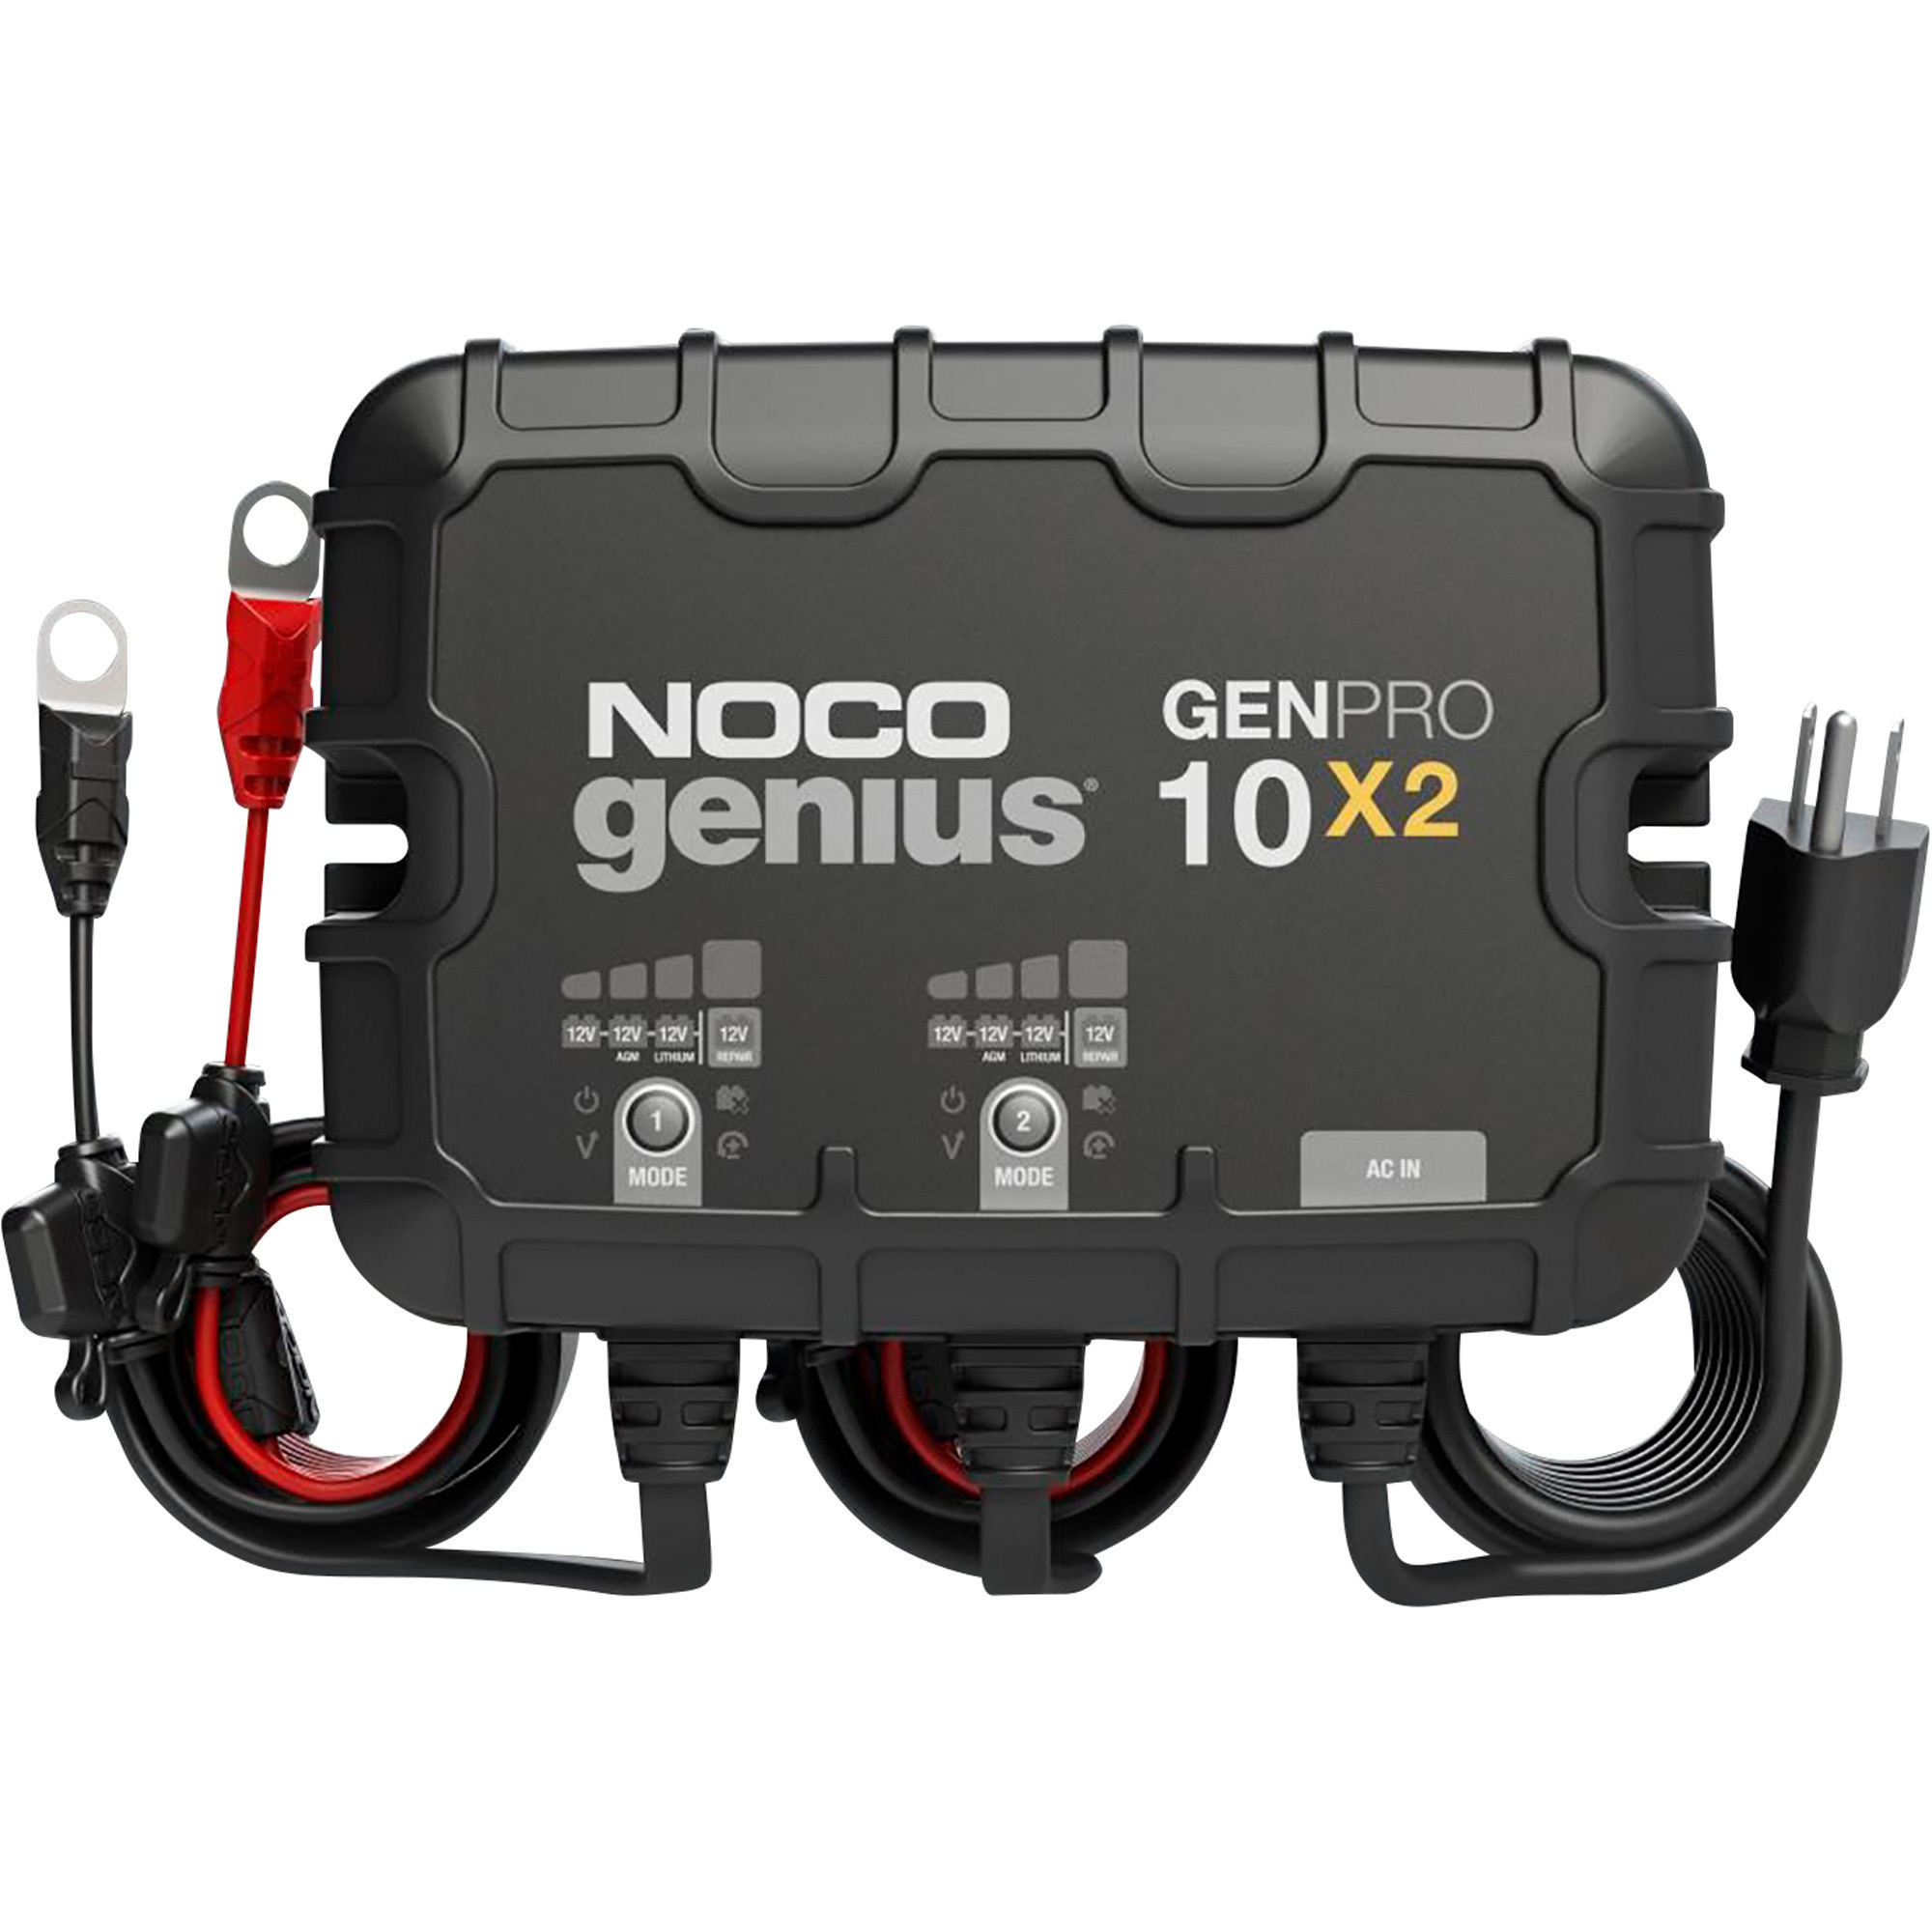 Noco Genius Onboard Battery Charger/Maintainer/Desulfator â 2 Banks, 20 Amps, Model GENPRO10X2